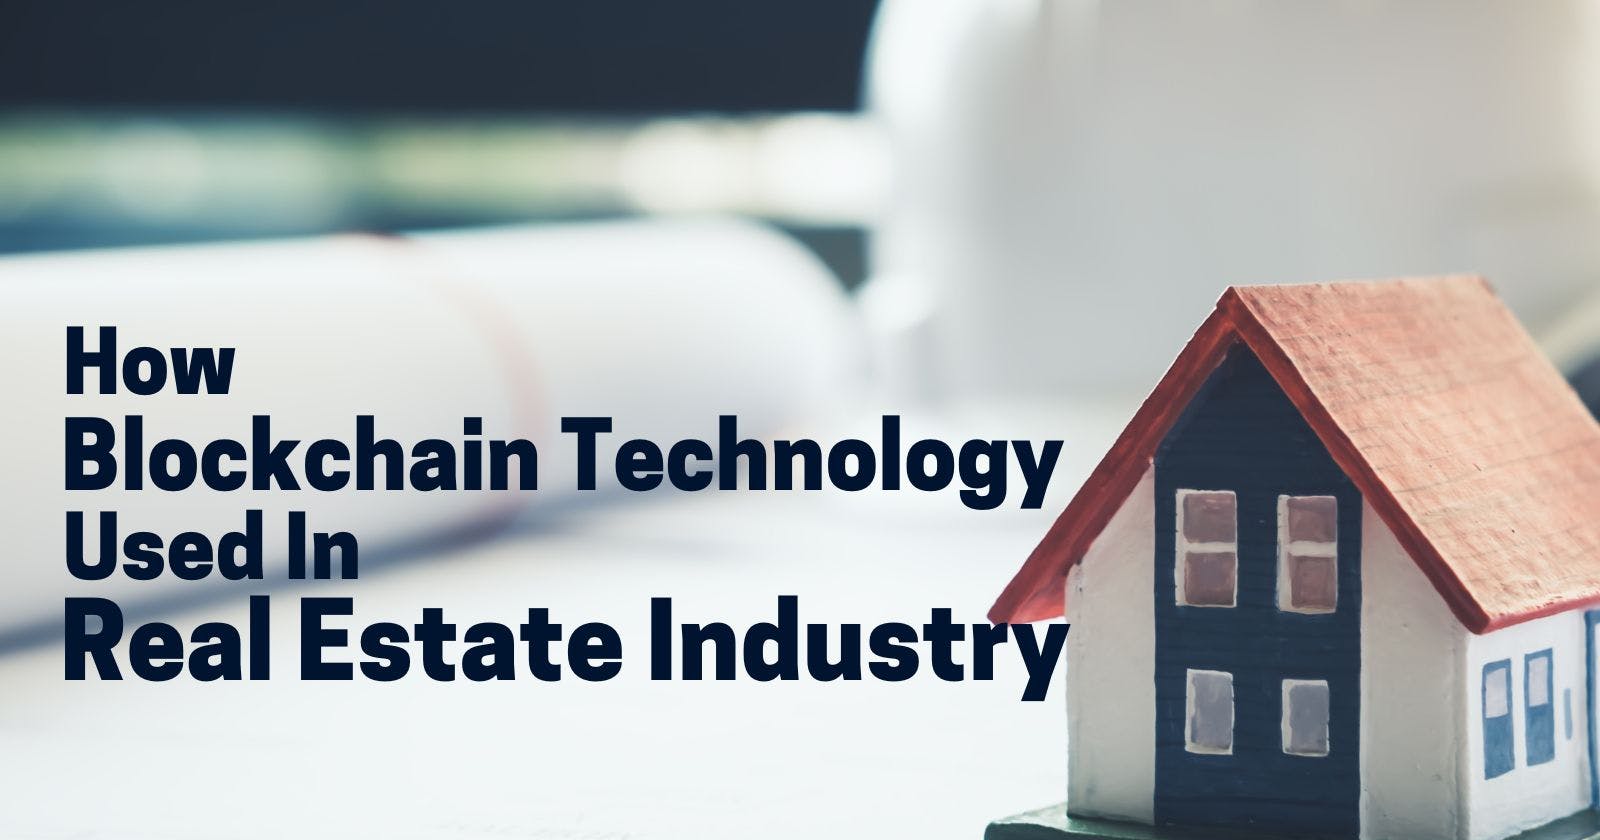 How Blockchain Technology is Used in the Real Estate Industry